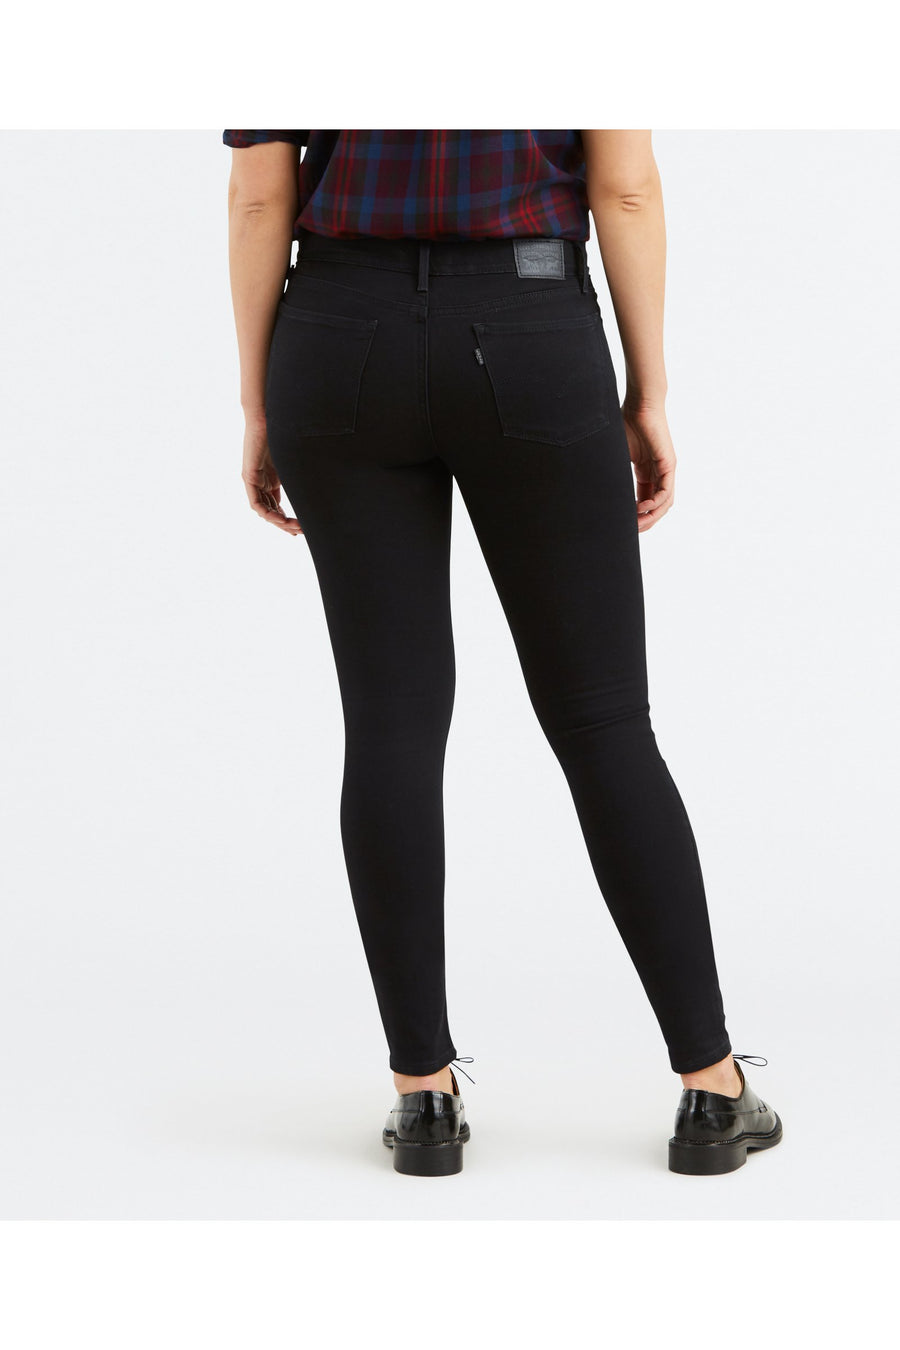 LEVIS JEANS - 710 SUPER SKINNY SECLUDED ECHO